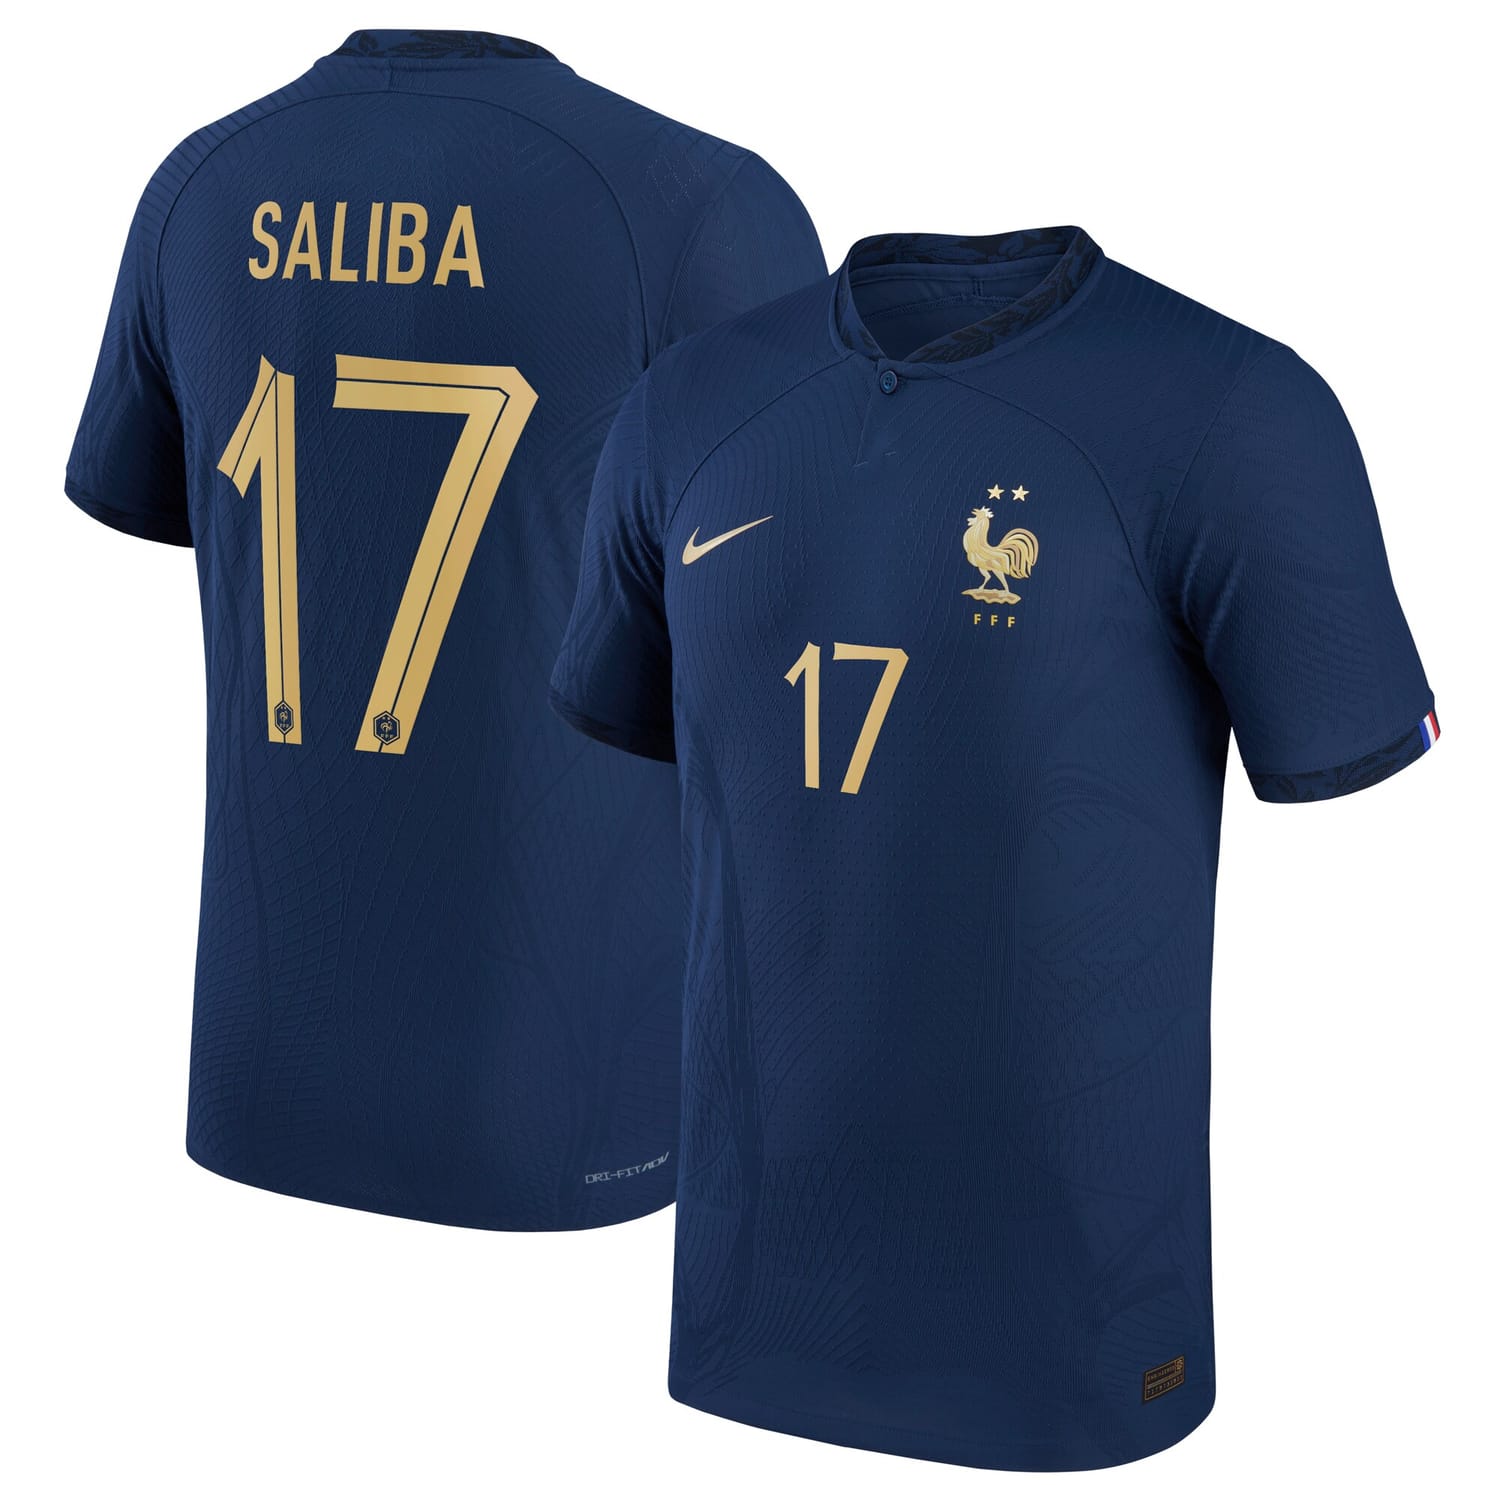 France National Team Home Authentic Jersey Shirt 2022 player Saliba 17 printing for Men